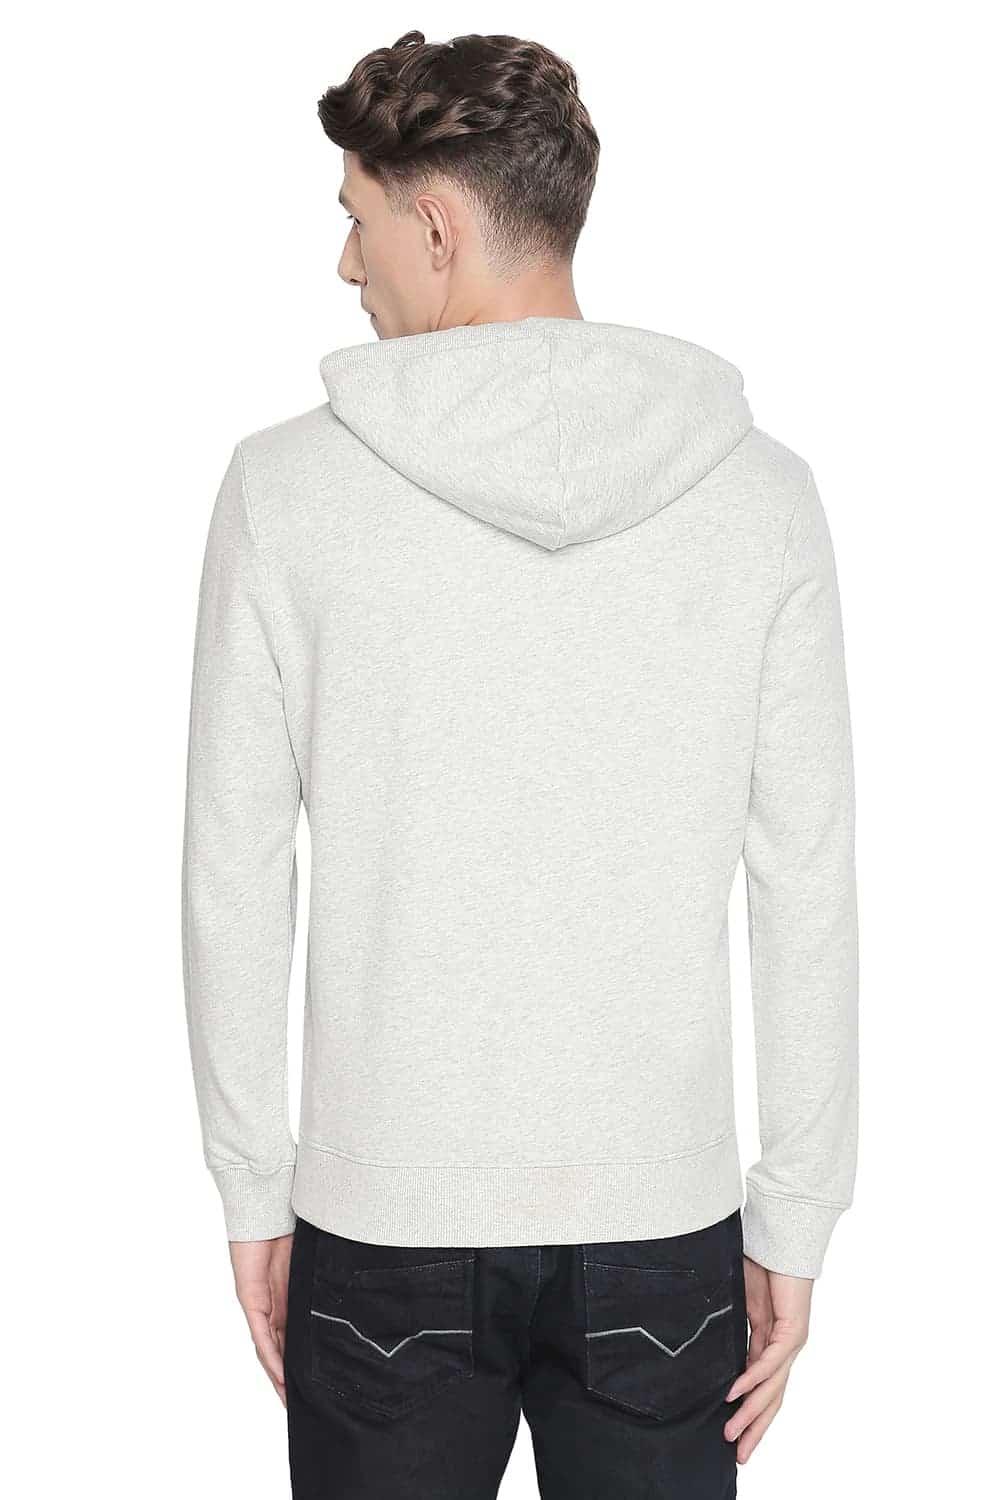 BASICS MUSCLE FIT HOODED PULLOVER KNIT JACKET